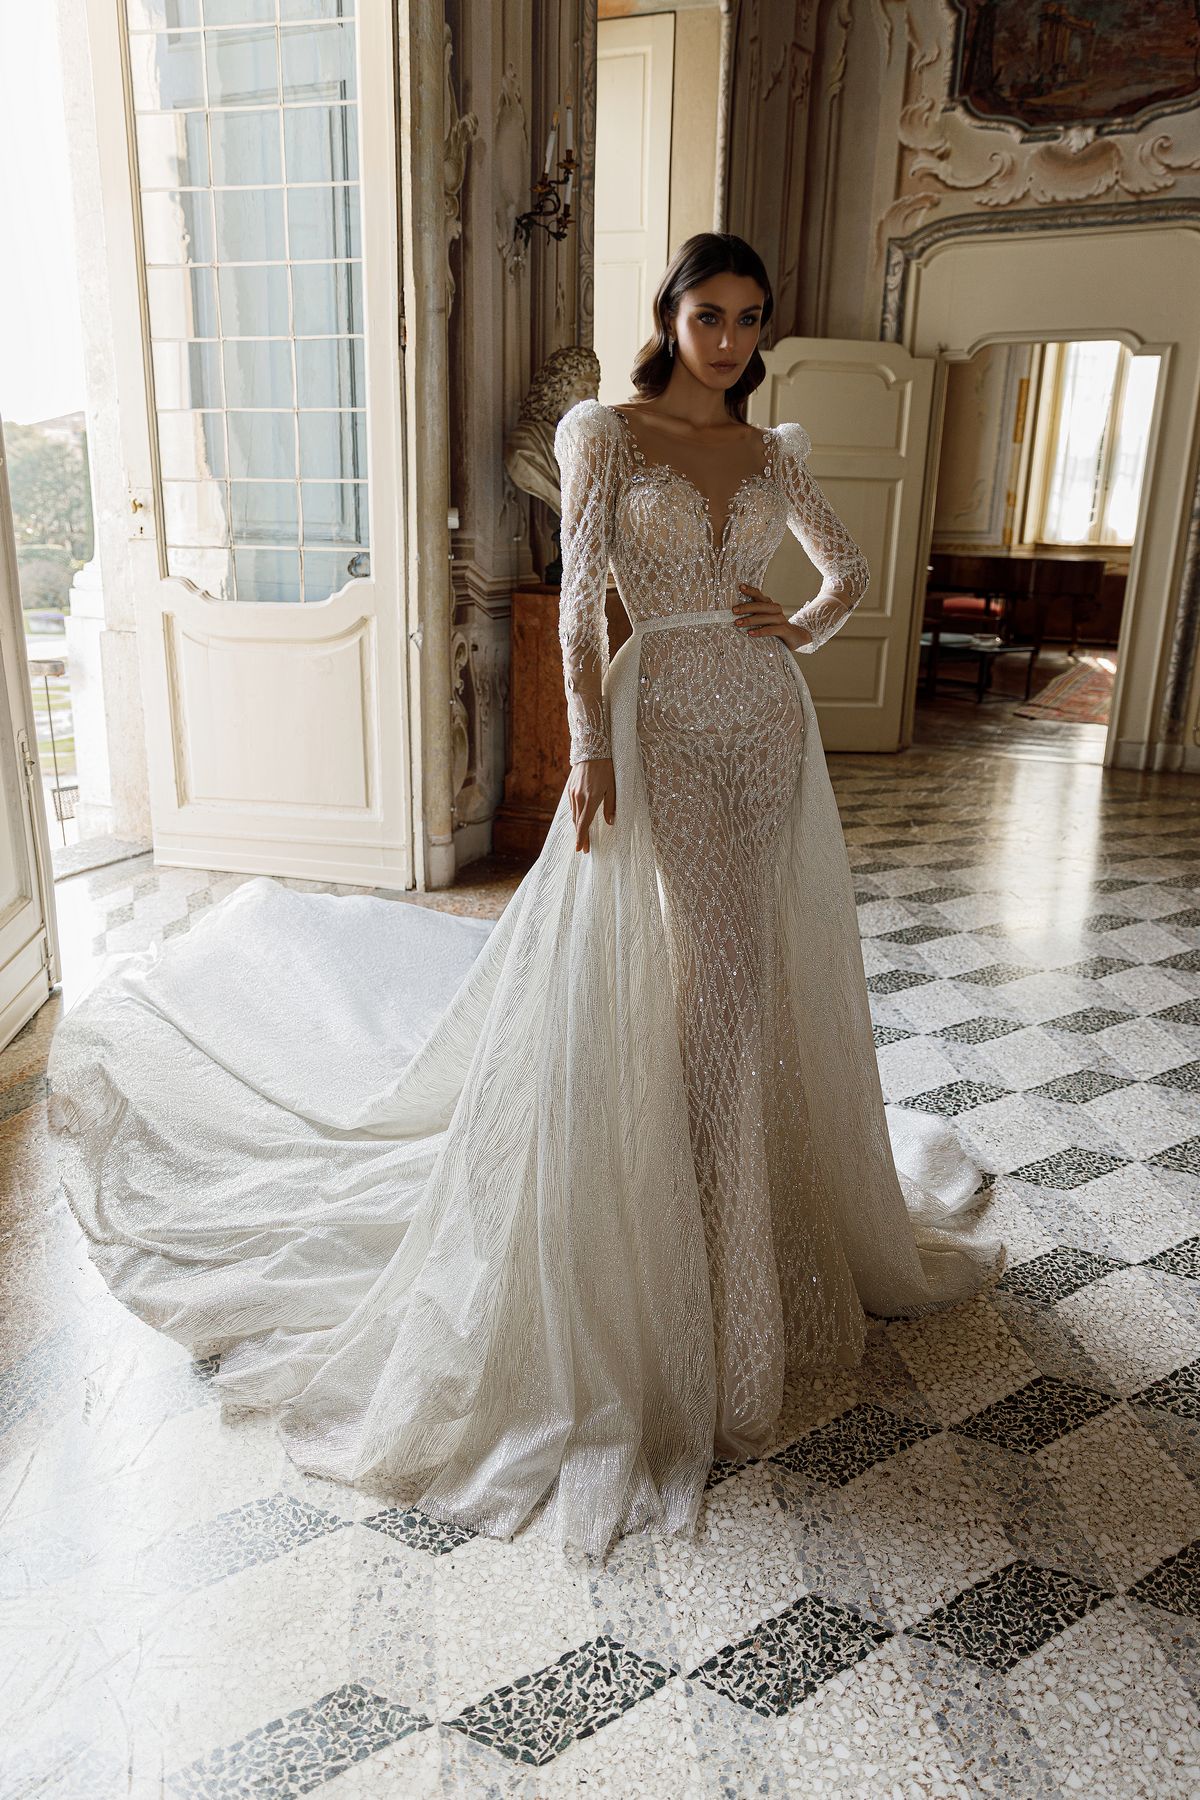 Fitted silhouette lace Maya wedding dress by Oksana Mukha embroidered with Swarovski crystals, long sleeves and detachable overskirt at Dell'Amore Bridal, Auckland, NZ 12